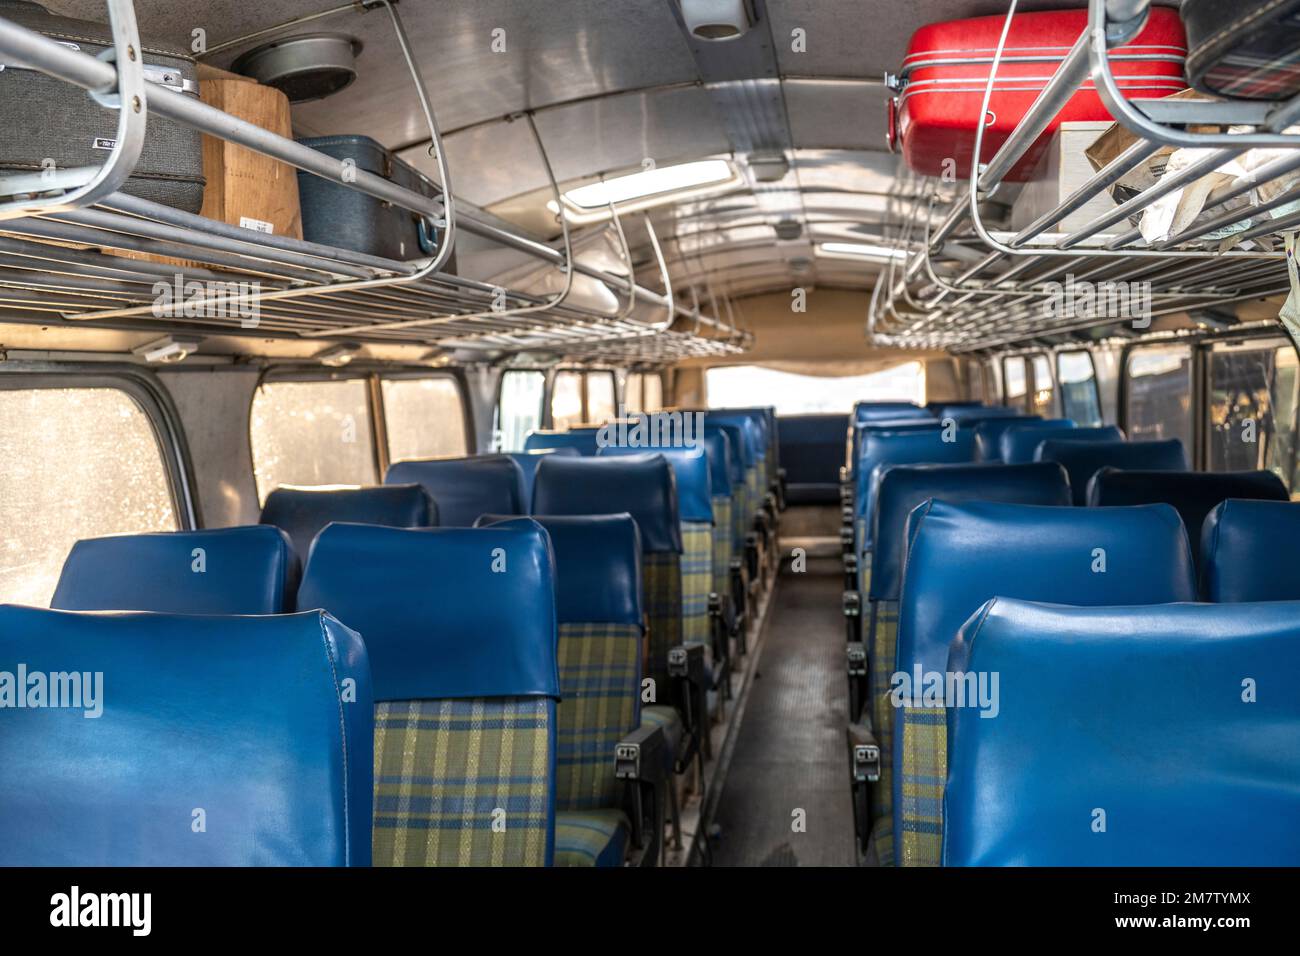 inside a transit bus with blue and pladid seats and luggage rack Stock Photo